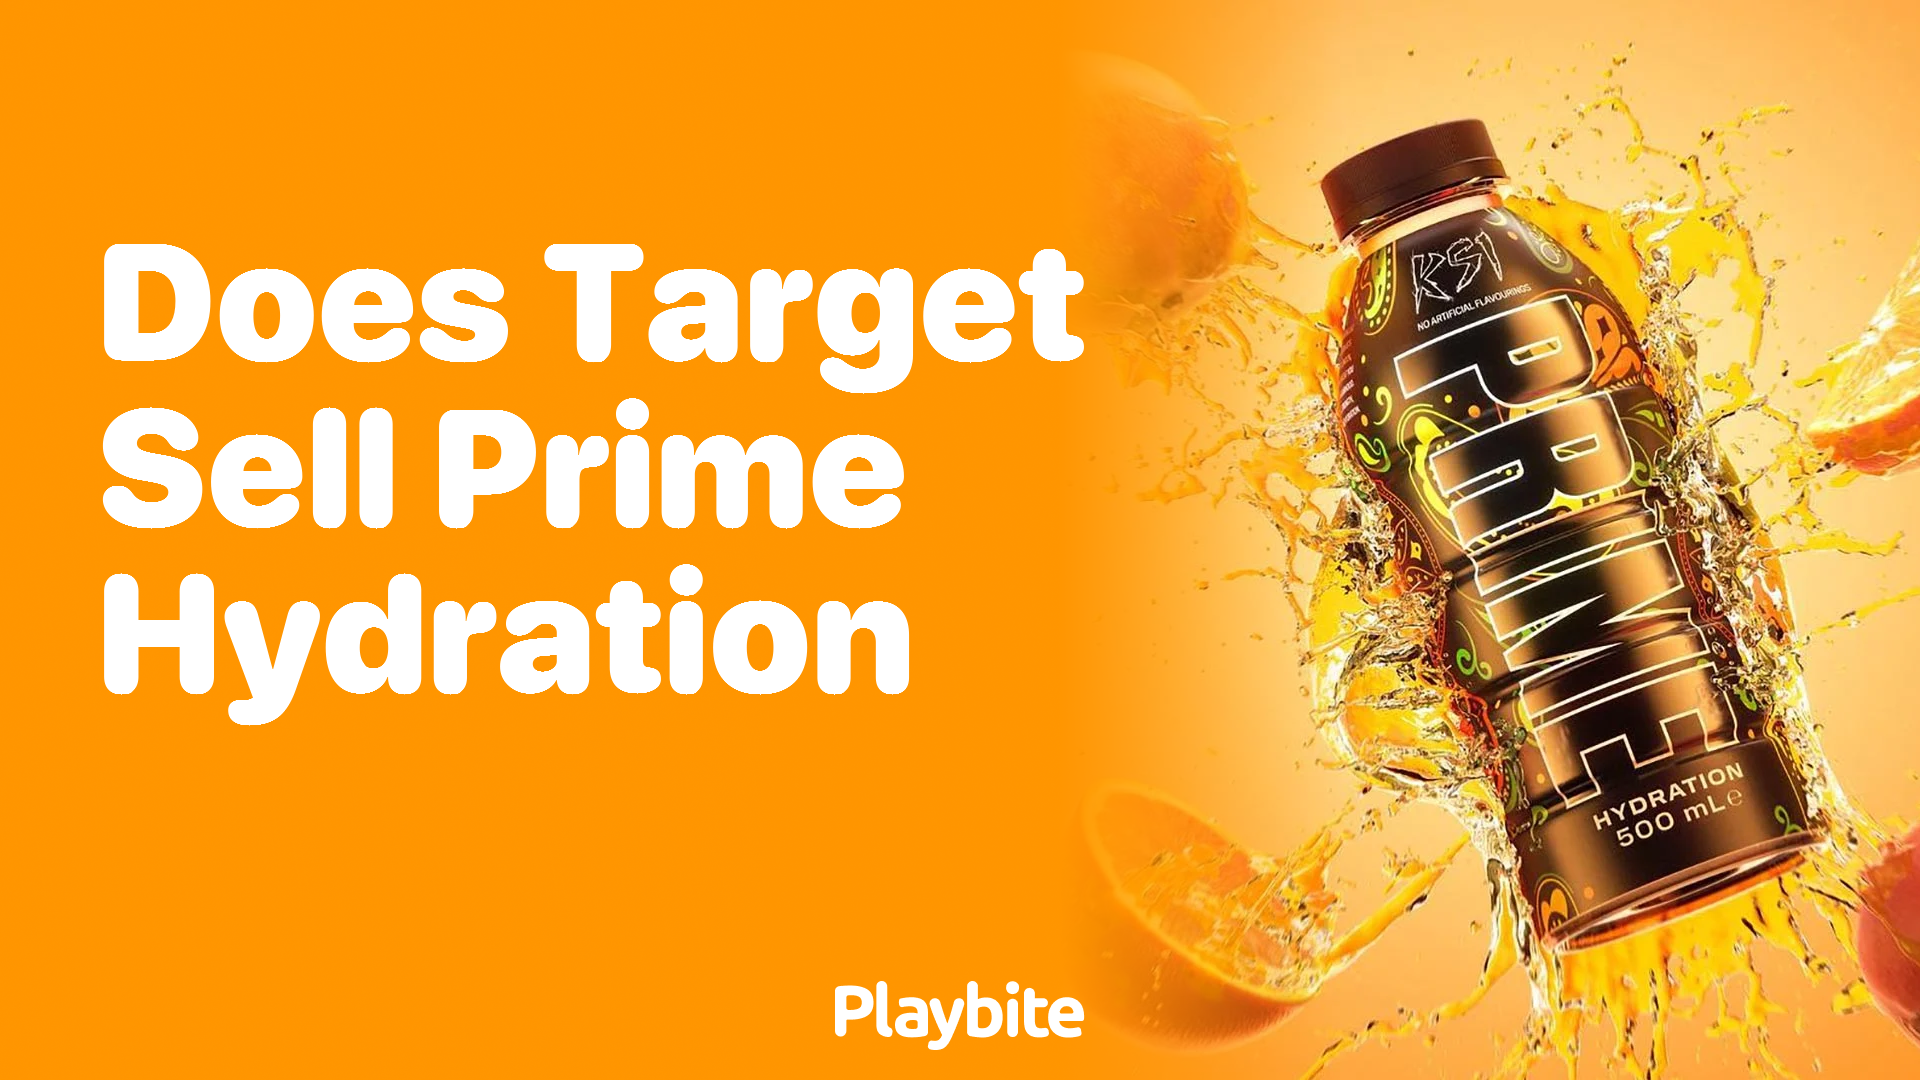 Does Target Sell Prime Hydration? Find Out Here!